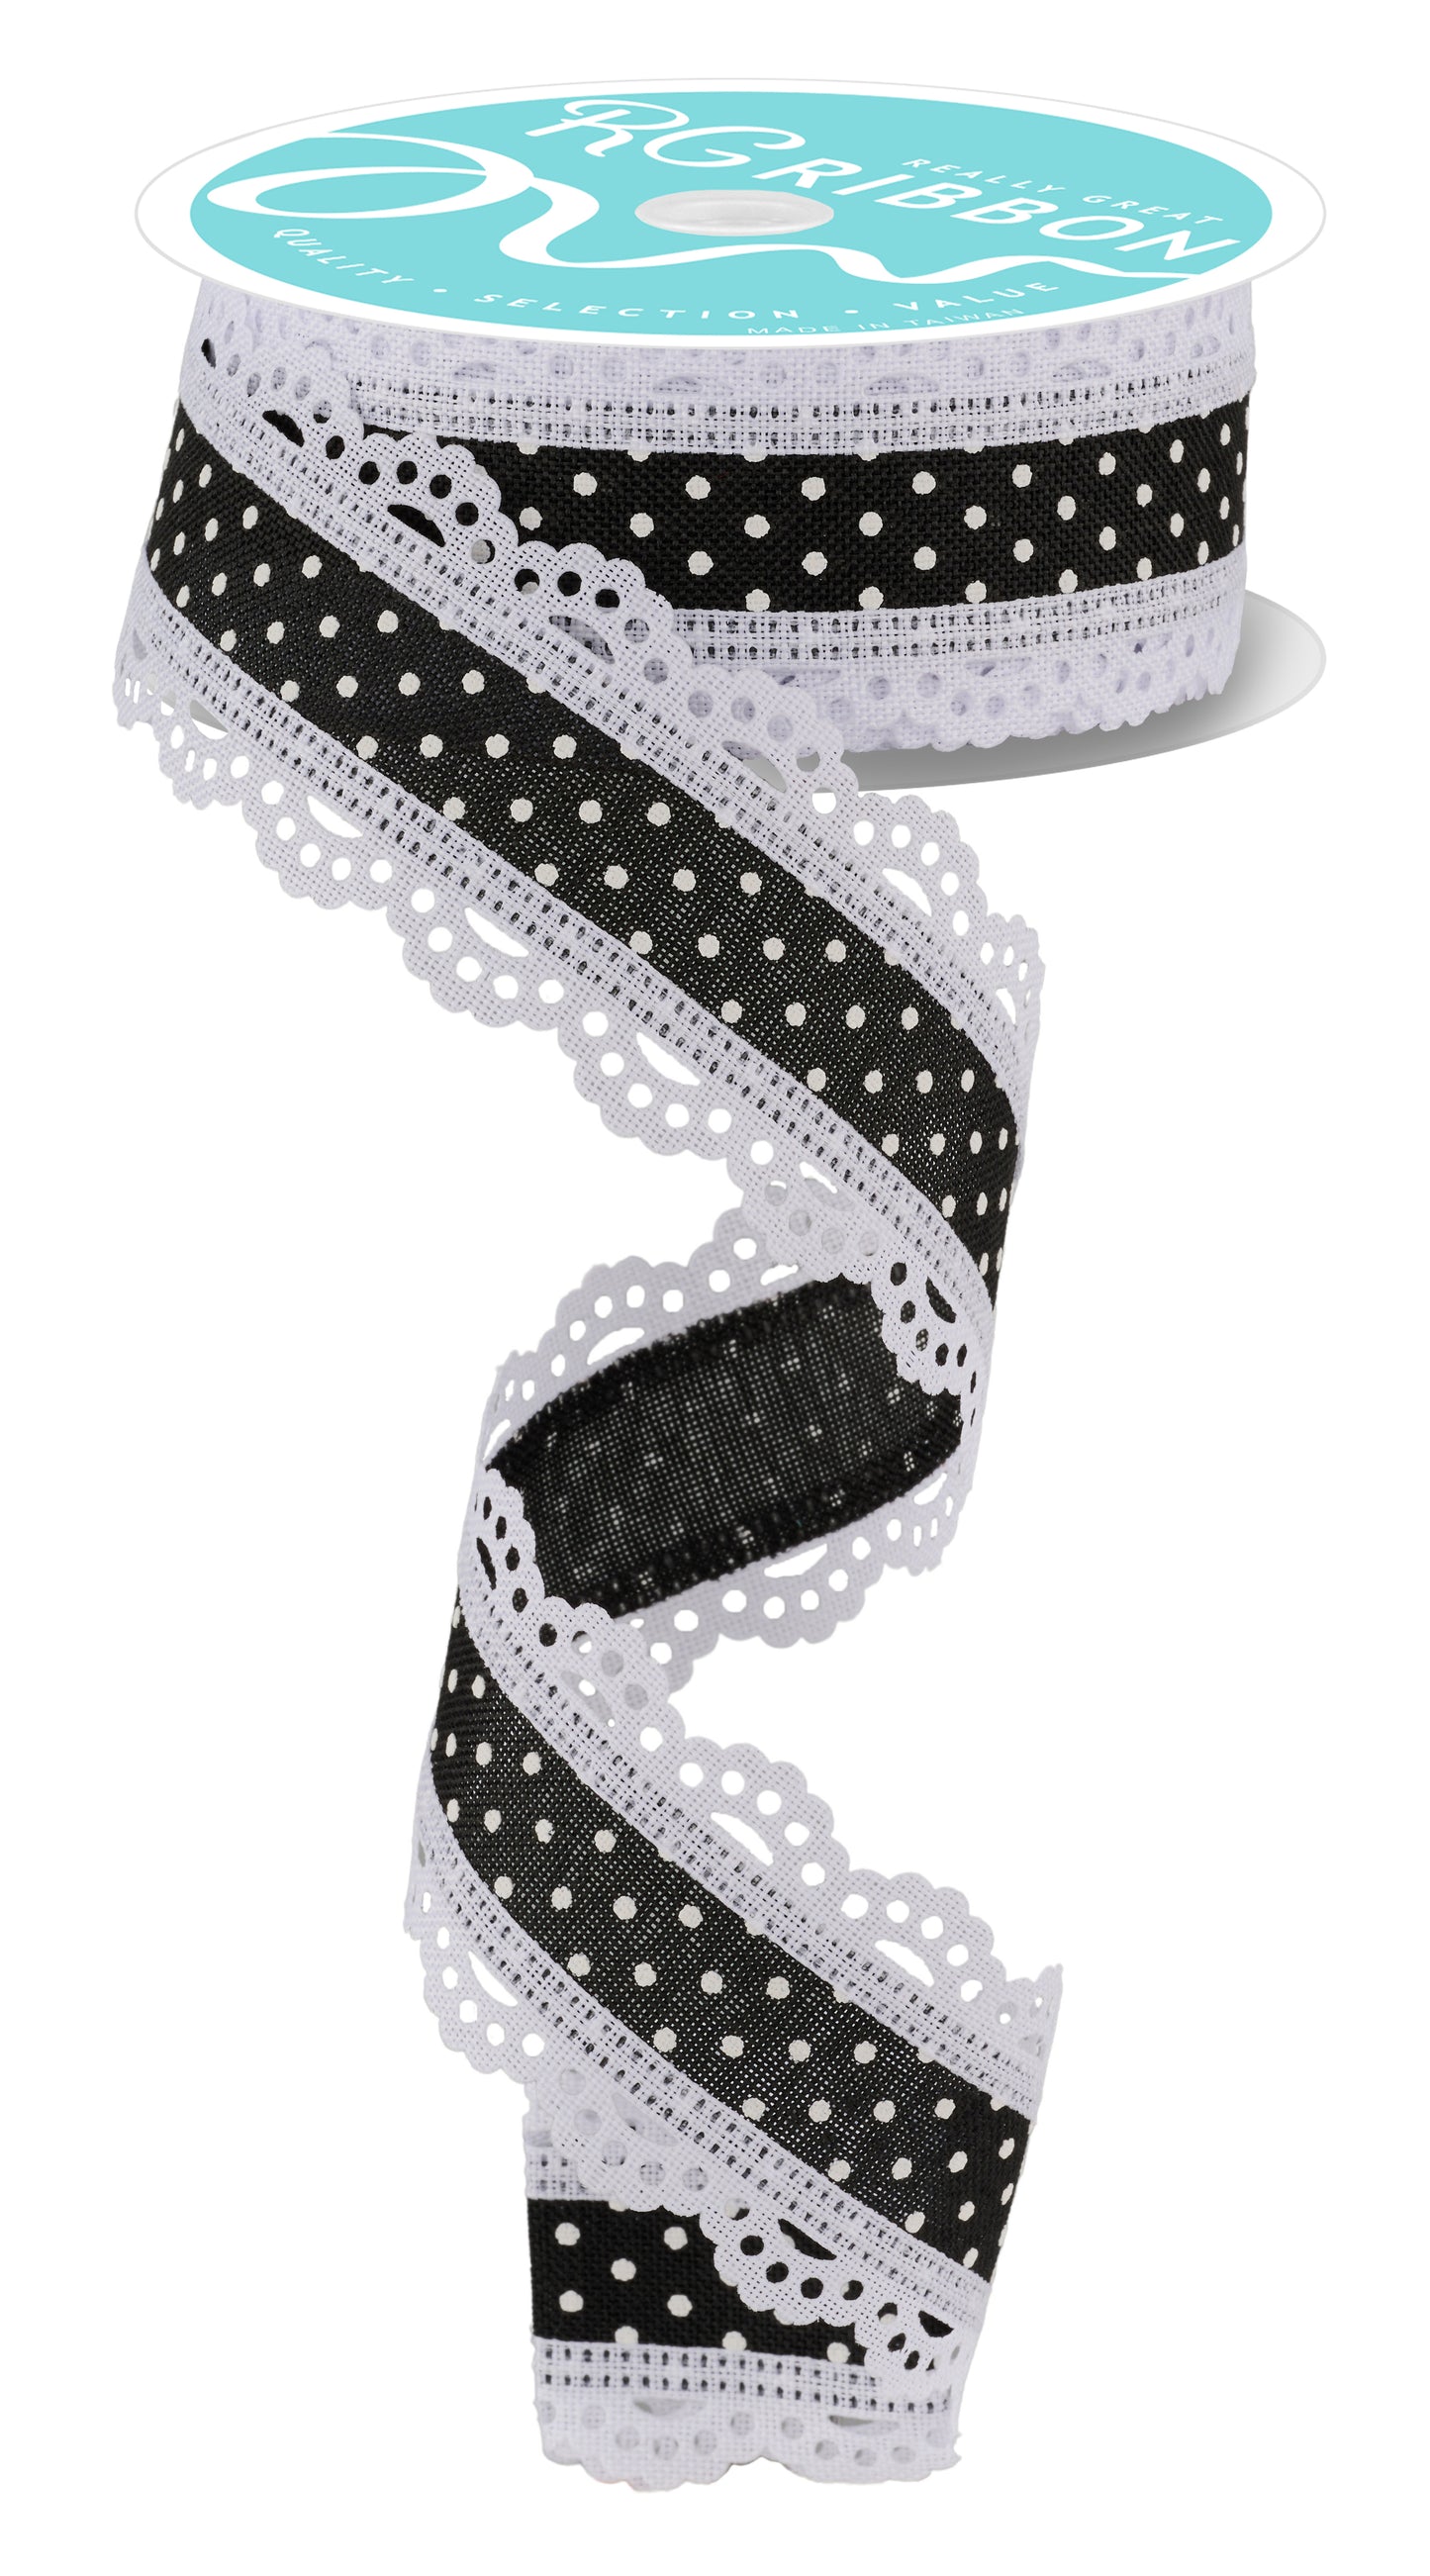 Wired Ribbon * Swiss Dot with Scalloped Edge * Black and White Canvas * 1.5" x 10 Yards * RG0886902